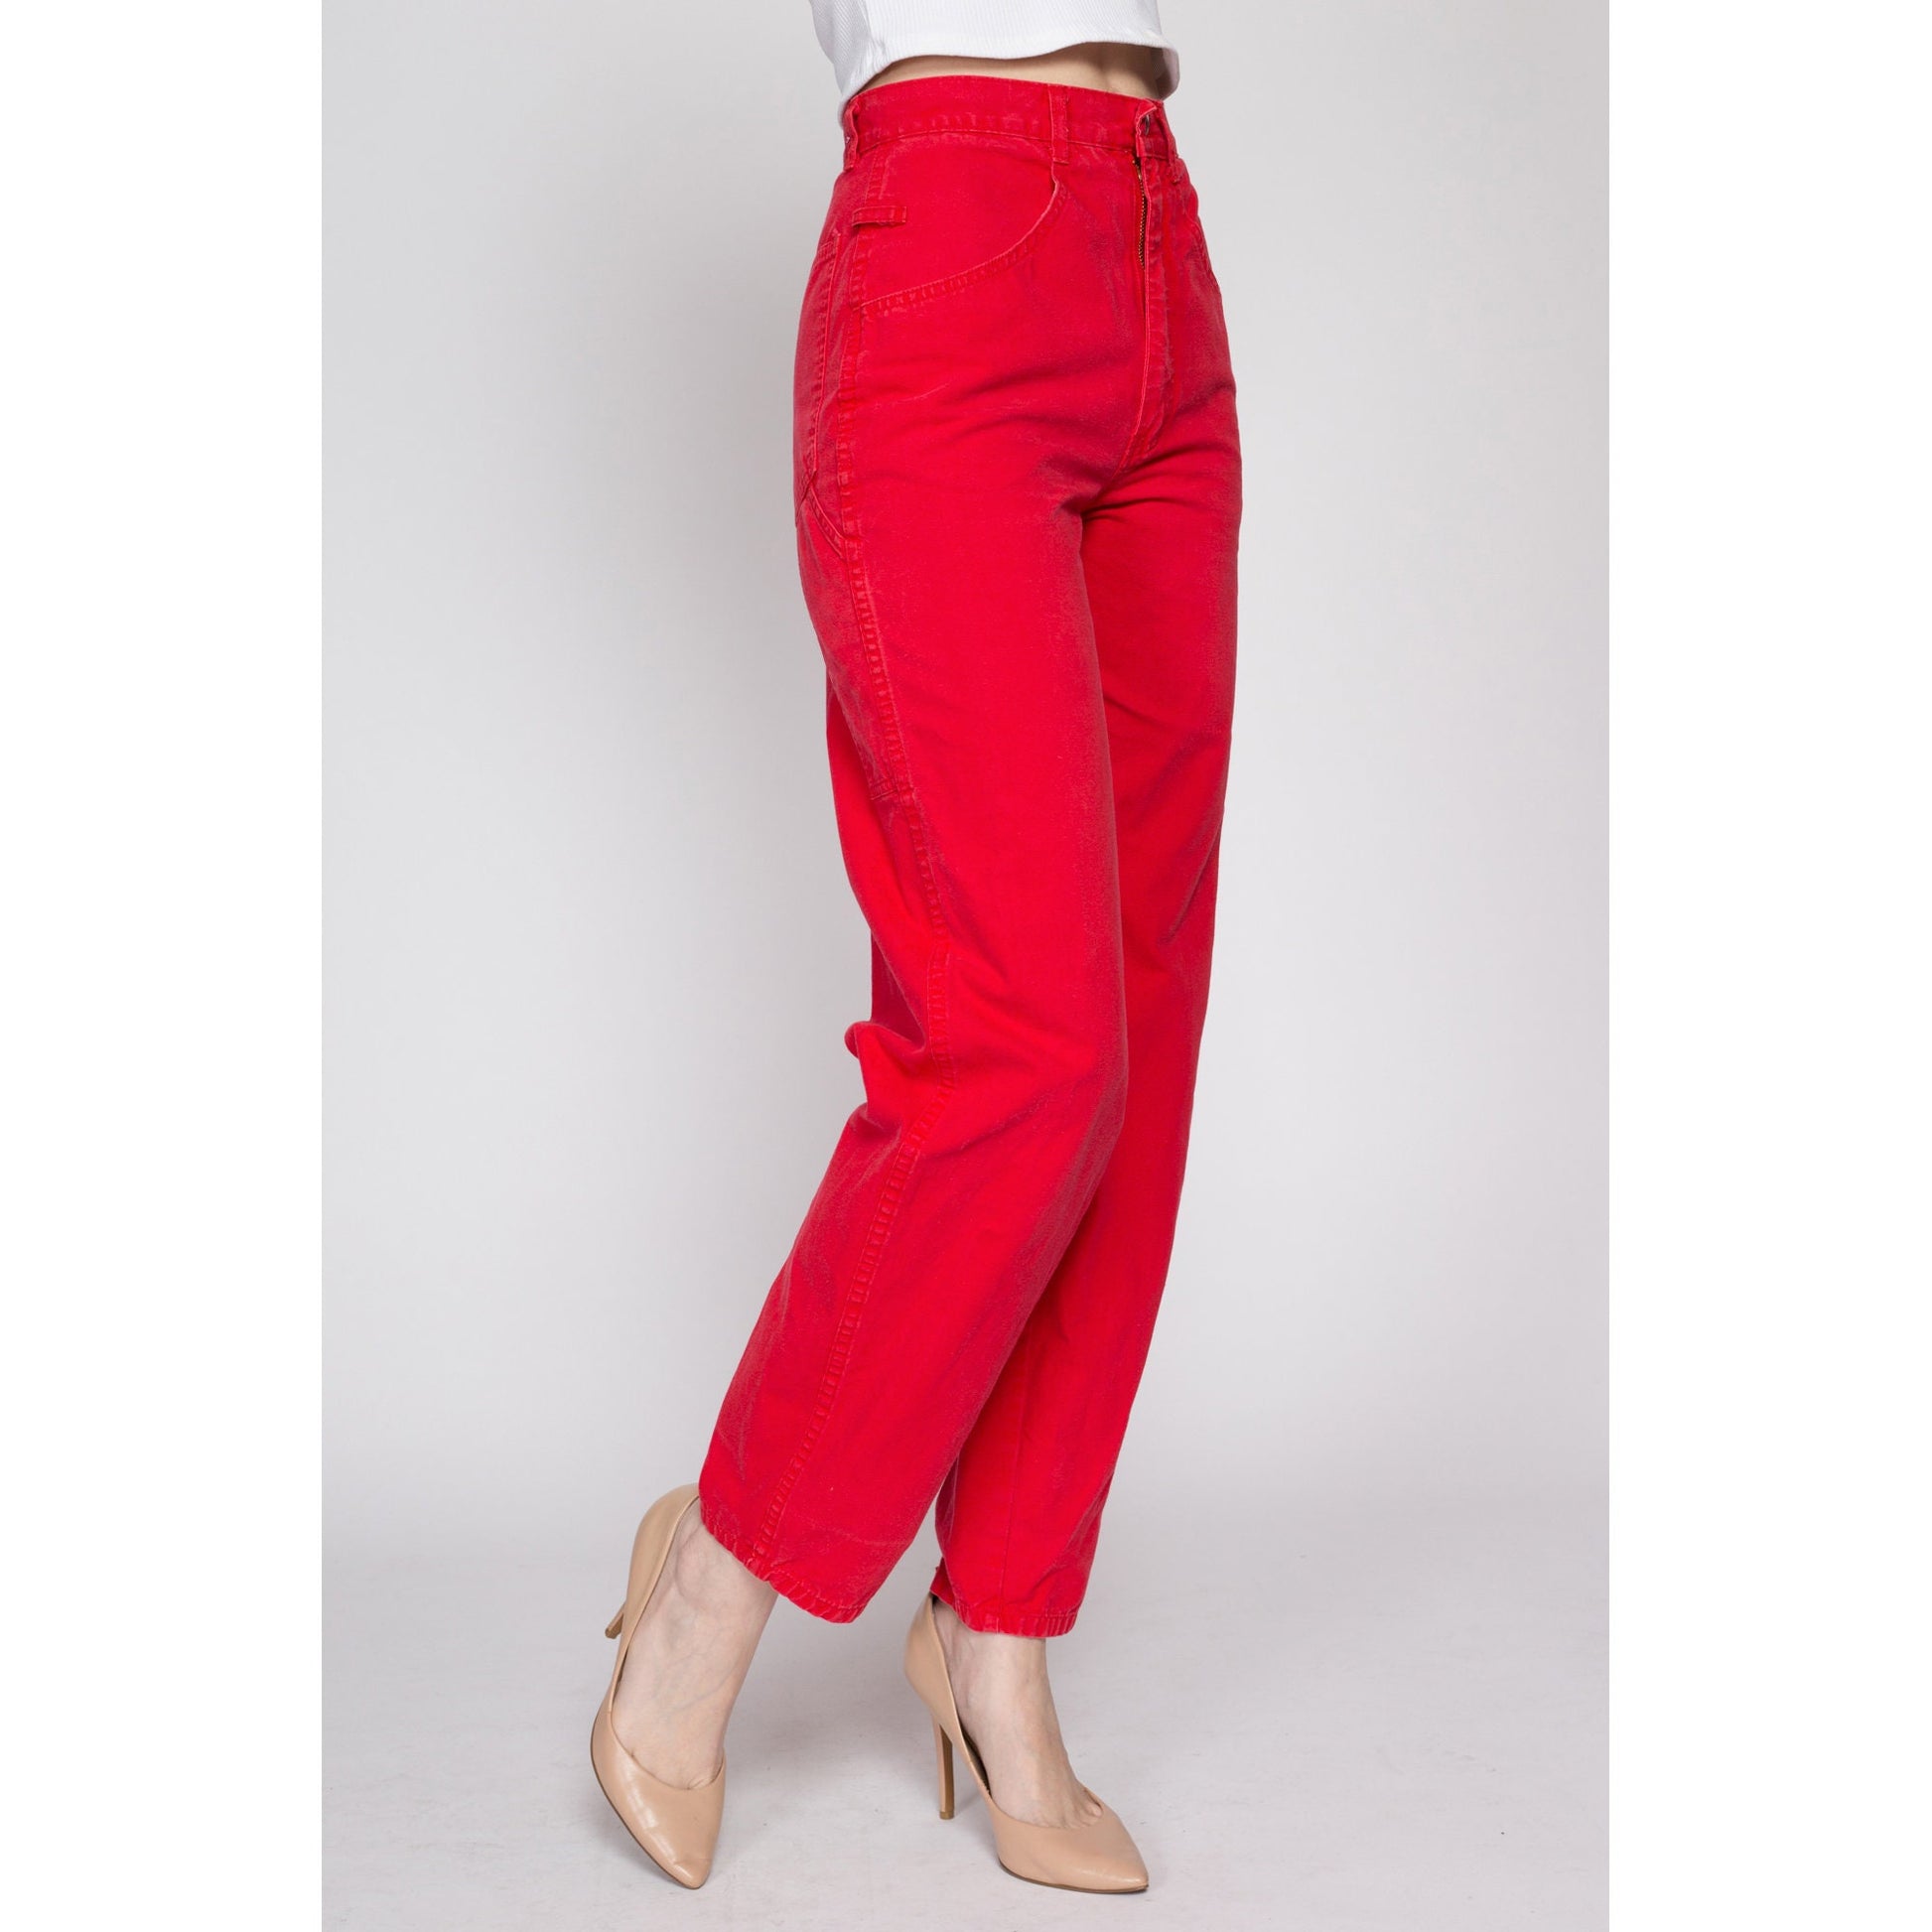 XS 80s Red Cotton Carpenter Pants 25" | Vintage High Waisted Tapered Leg Retro Trousers